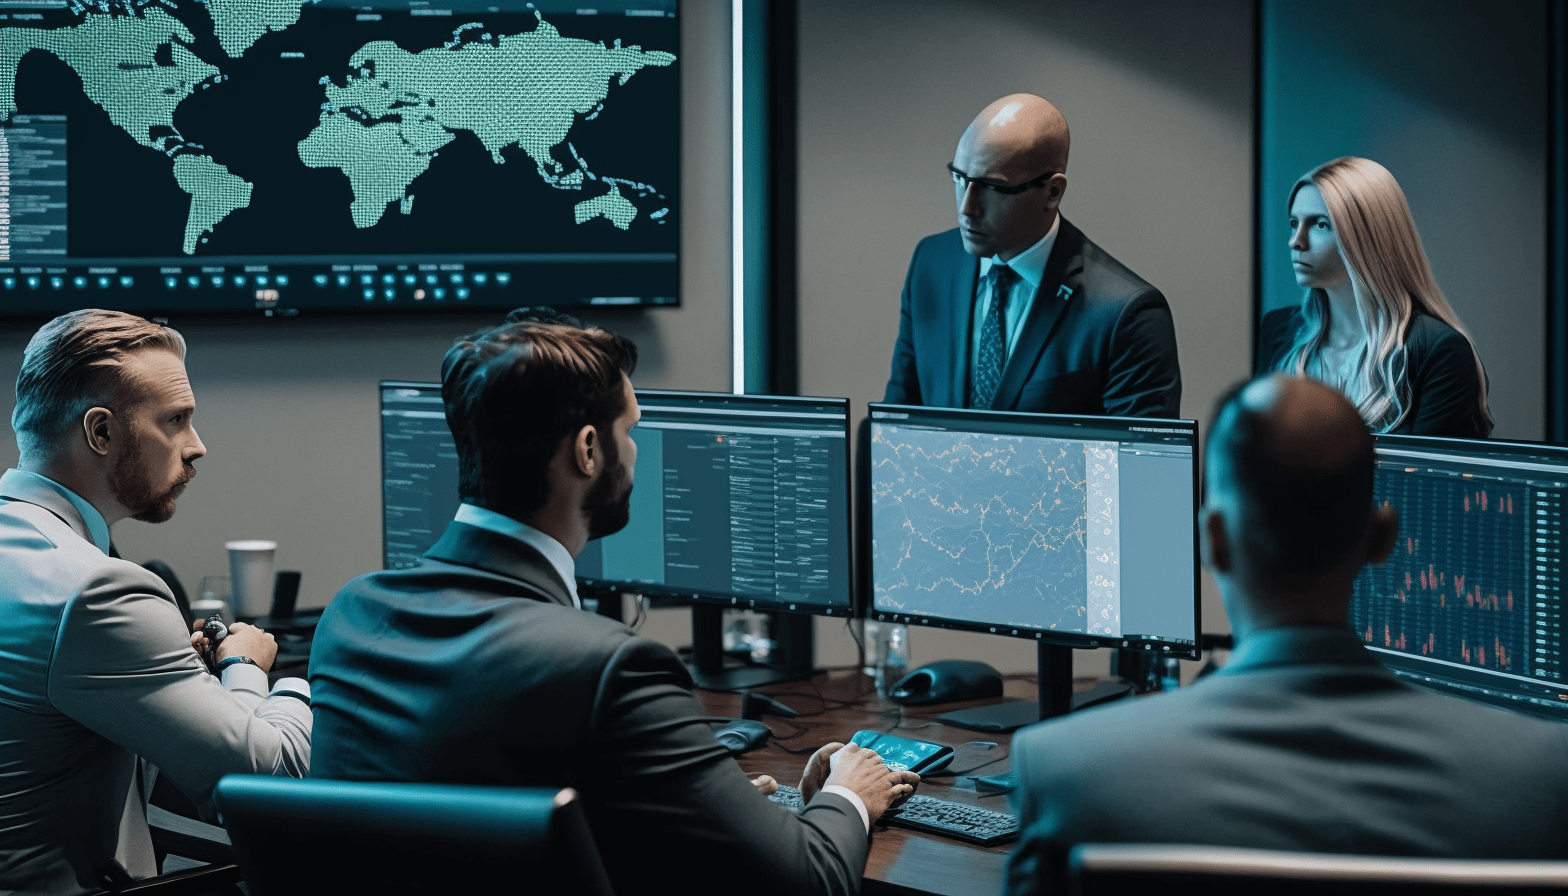 An image of a group of cybersecurity professionals in a boardroom, working together to ensure their organization's systems and data are secure.